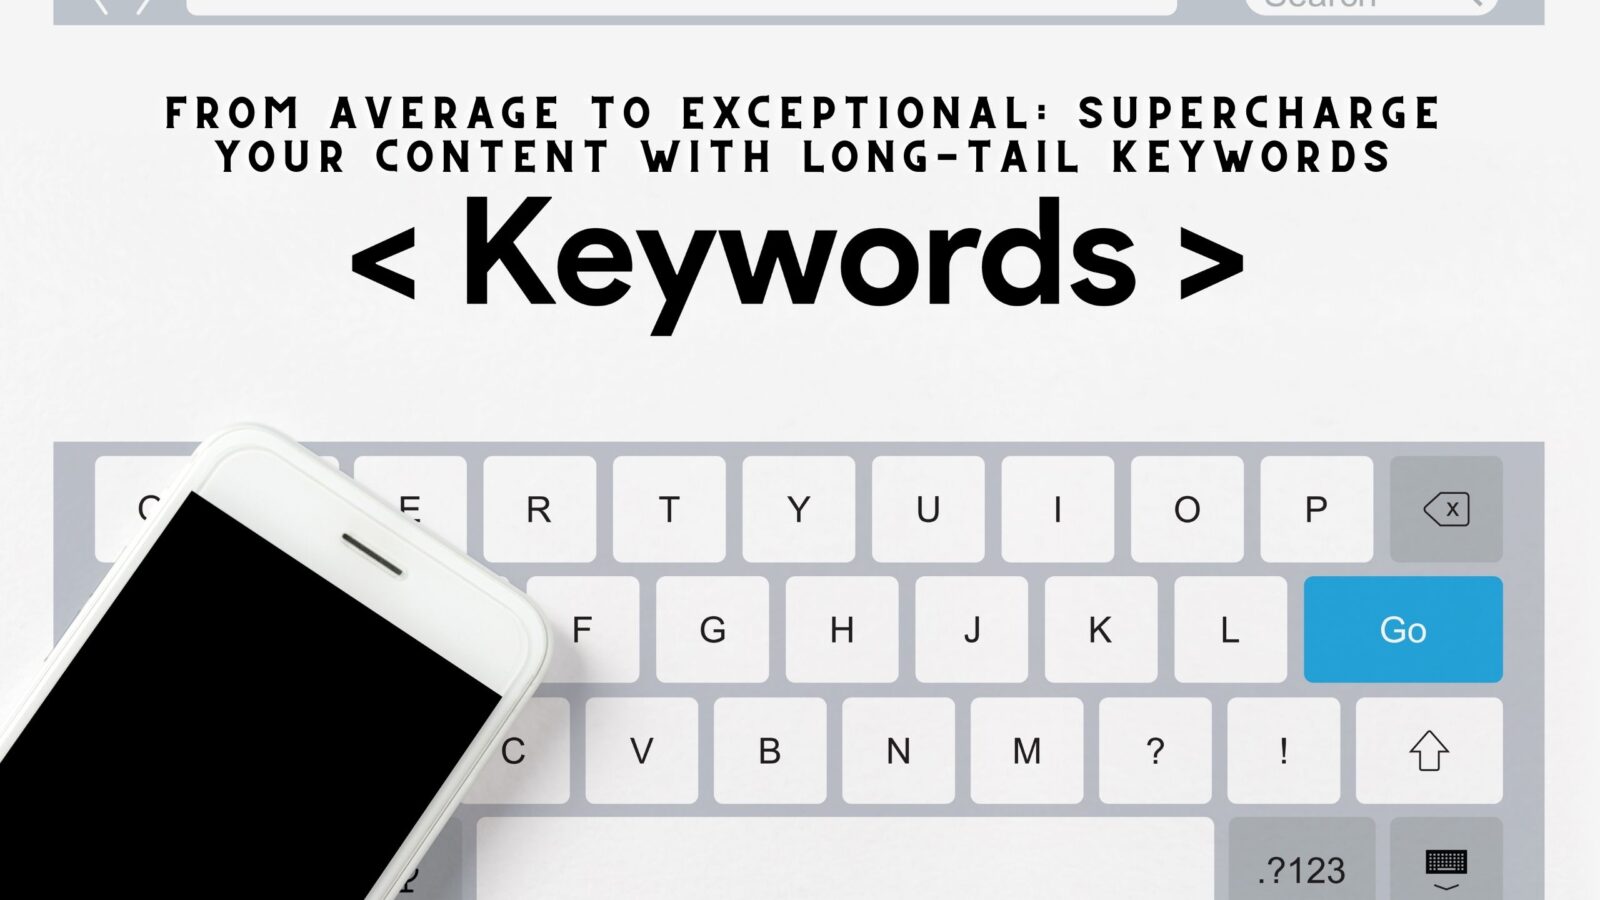 From Average to Exceptional: Supercharge Your Content with Long-Tail Keywords